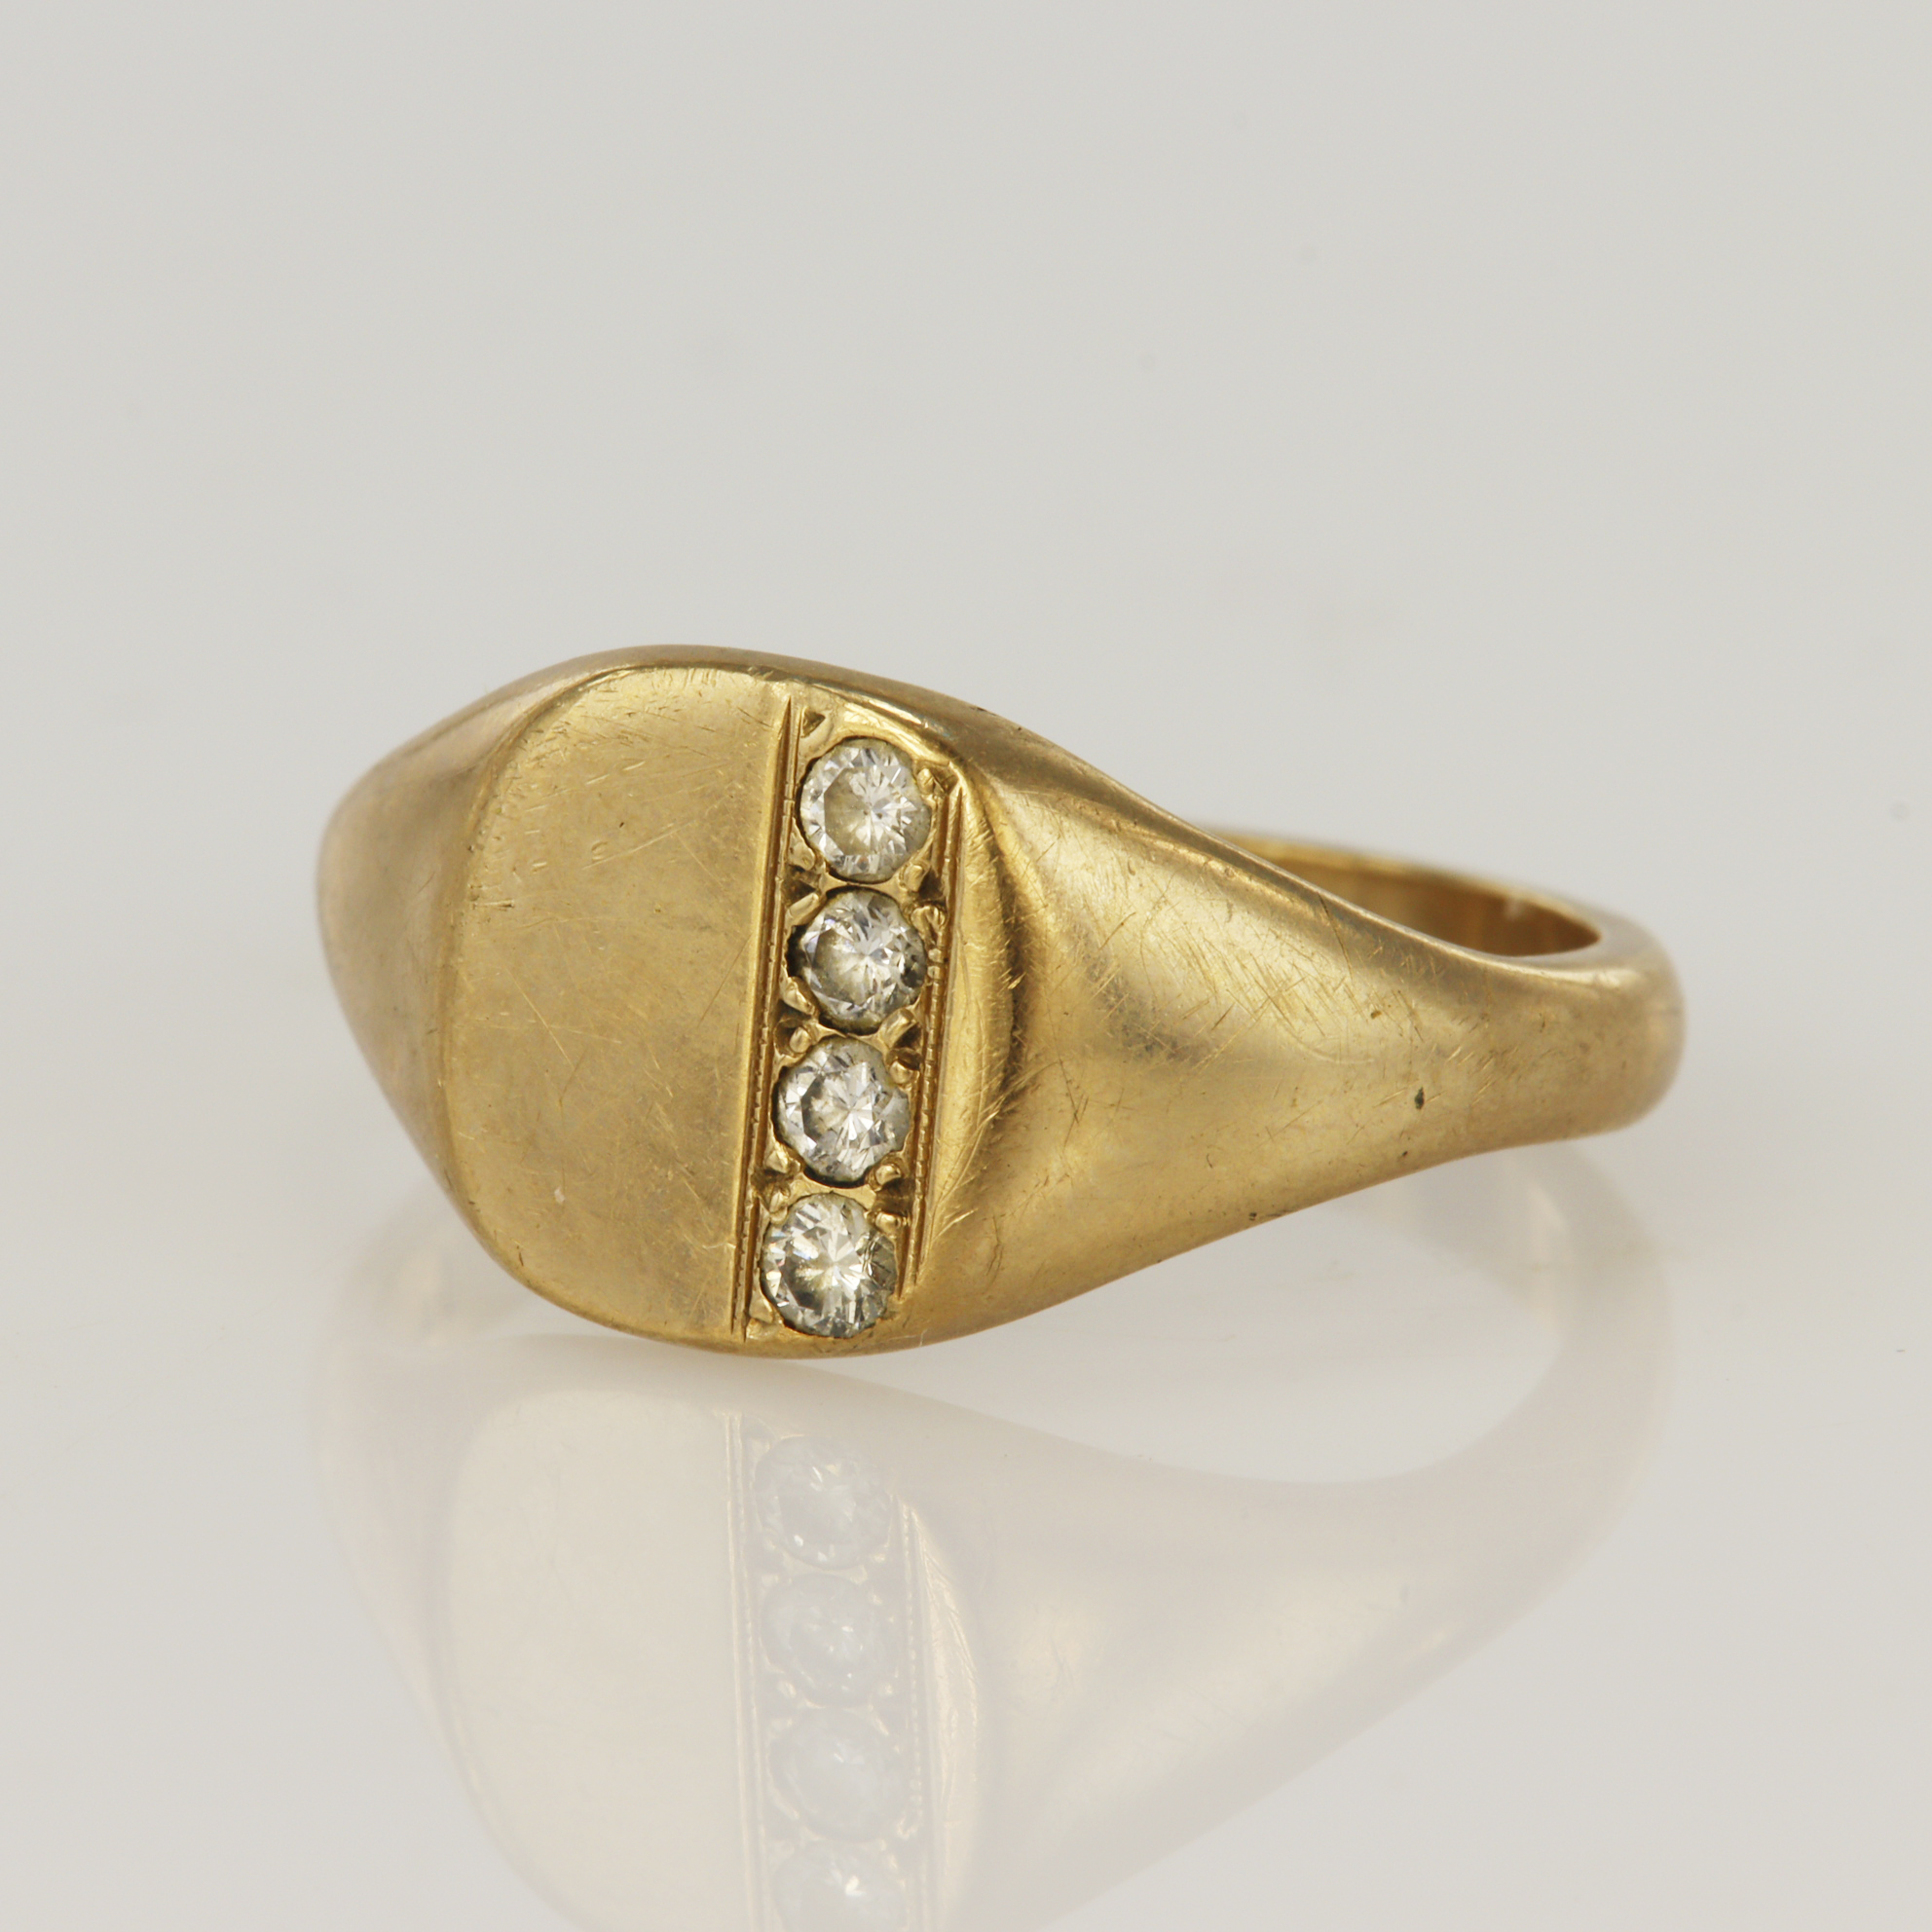 9ct yellow gold diamond signet ring, cushion table set with four round brilliants, TDW approx. 0.